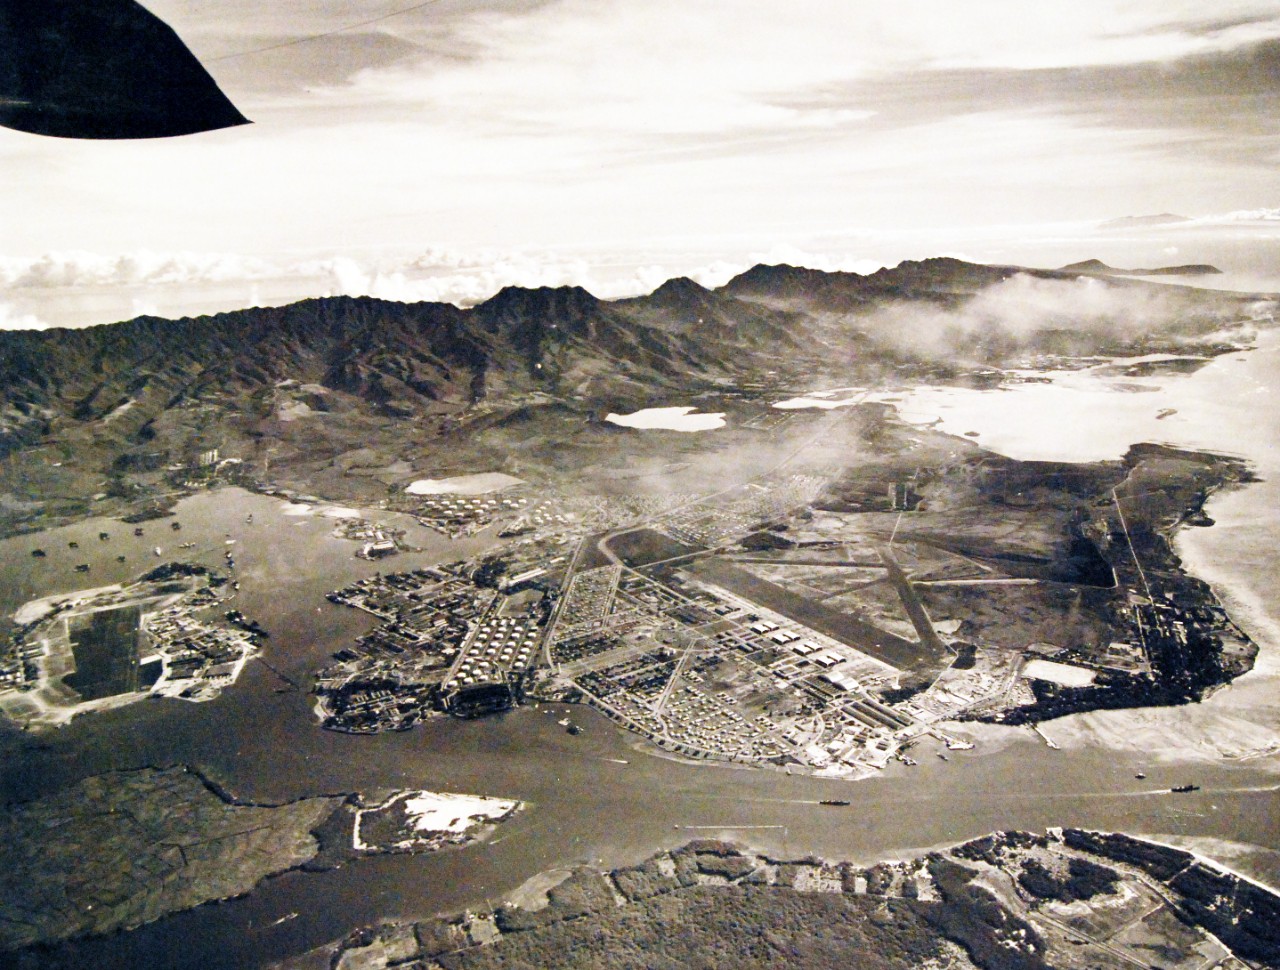 80-G-182873:  Pearl Harbor, Territory of Hawaii, October 30, 1941.   View looks east, taken by aircraft from Naval Air Station, Pearl Harbor. U.S. Navy photograph, now in the collections of the National Archives (9/9/2015).